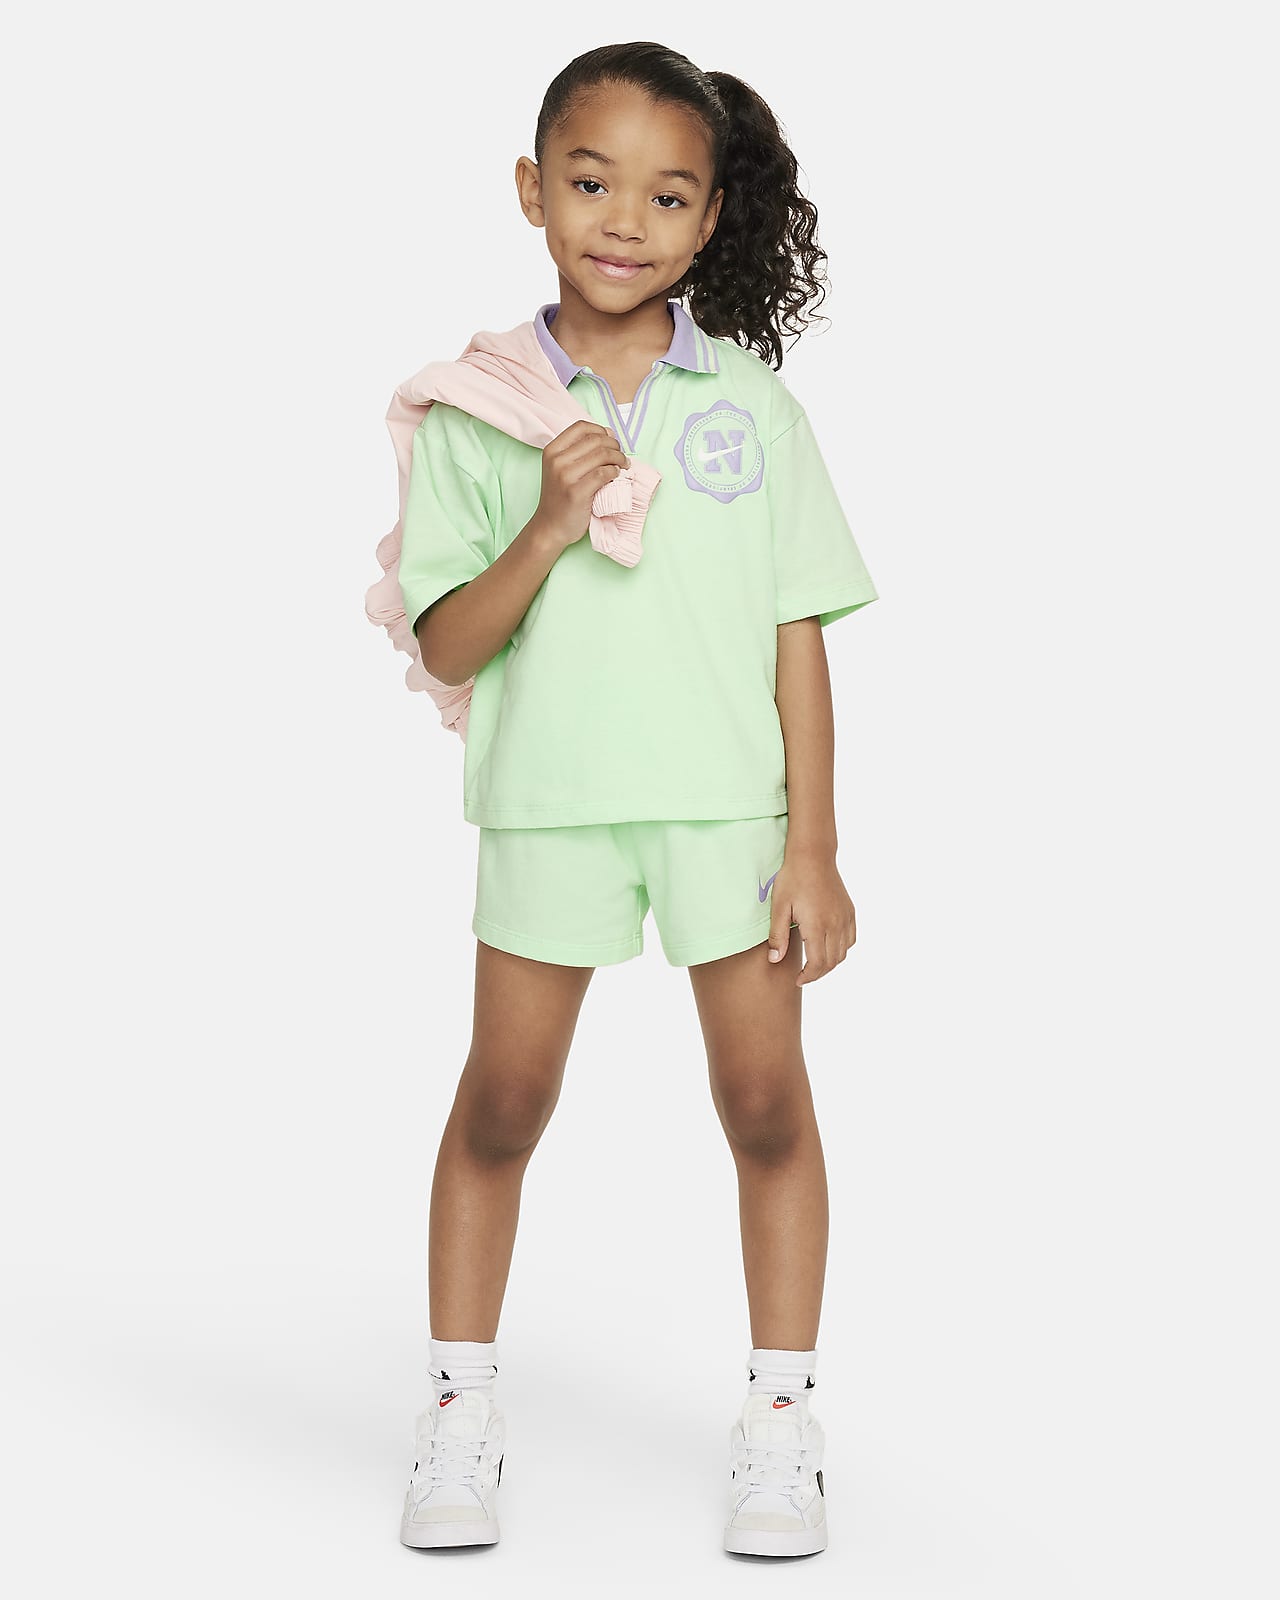 Nike Prep in Your Step Little Kids' Shorts Set